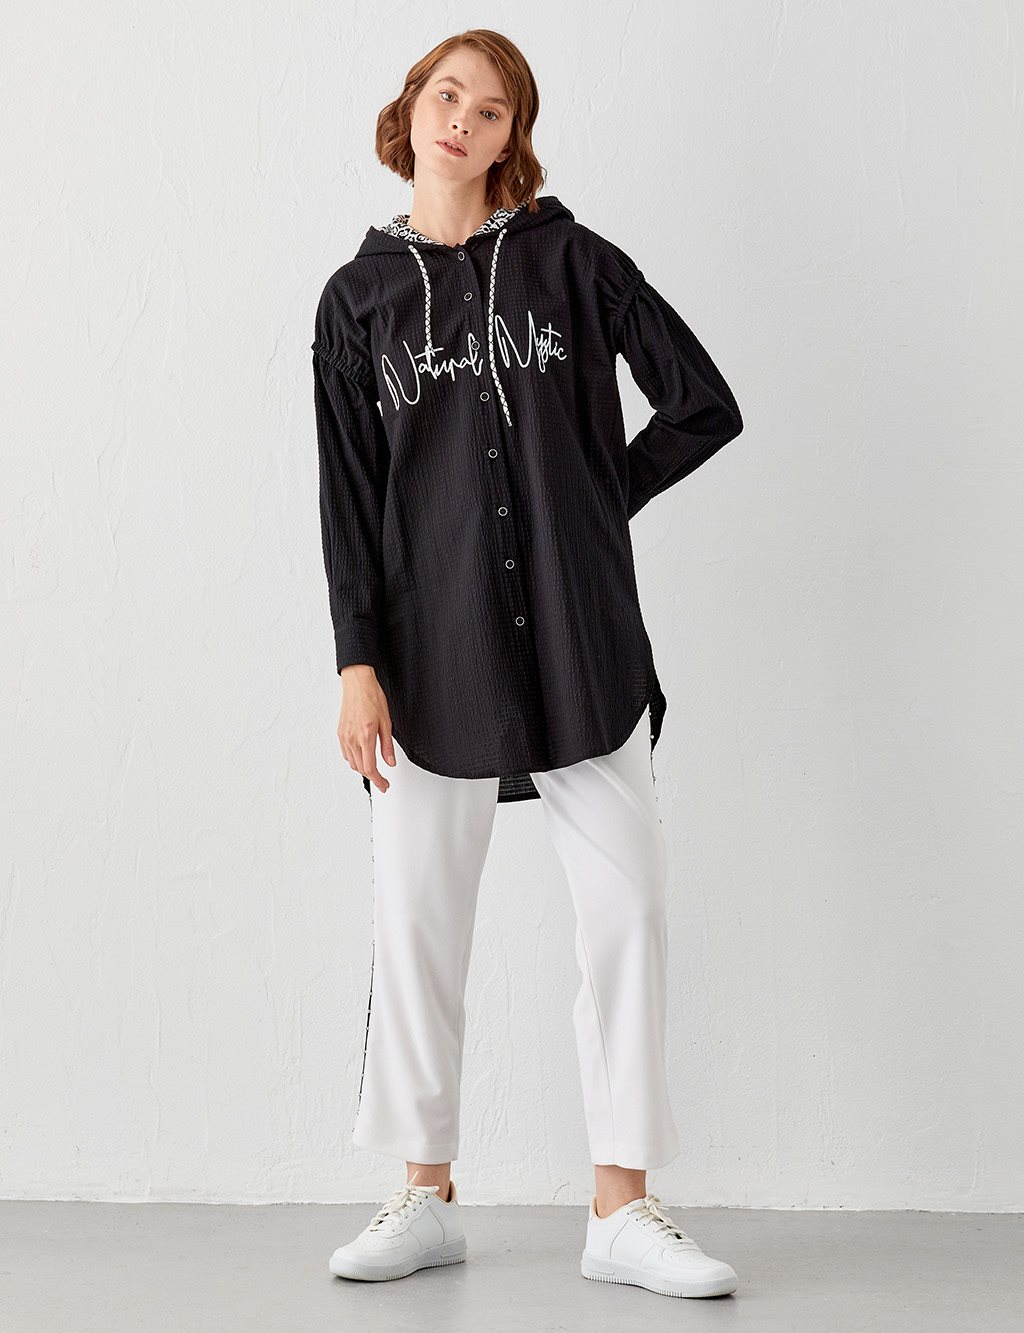 Hooded Sequined Shirt Black